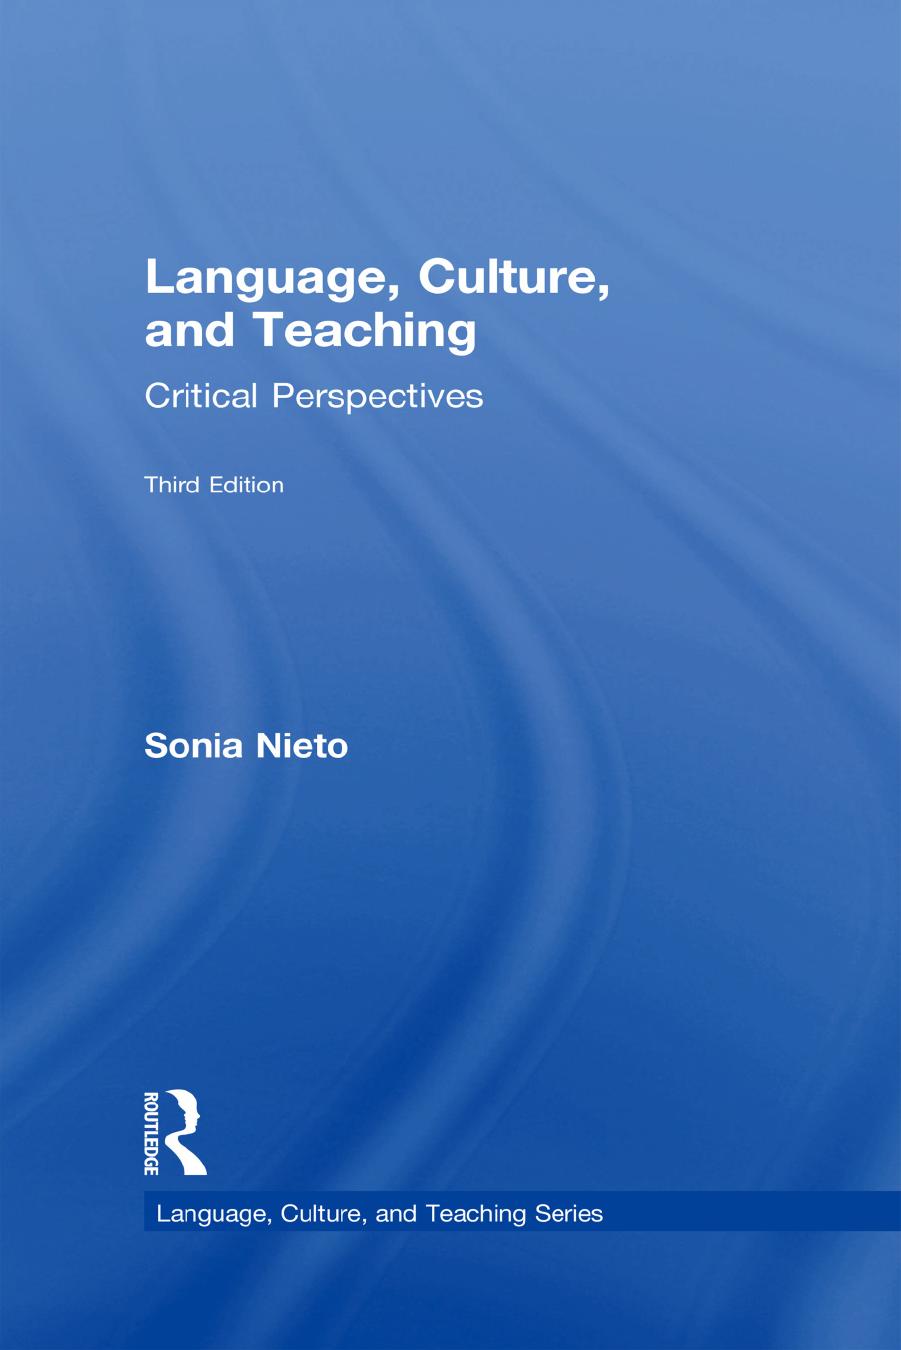 (eBook PDF)Language, Culture, and Teaching Critical Perspectives 3rd Edition by Sonia Nieto